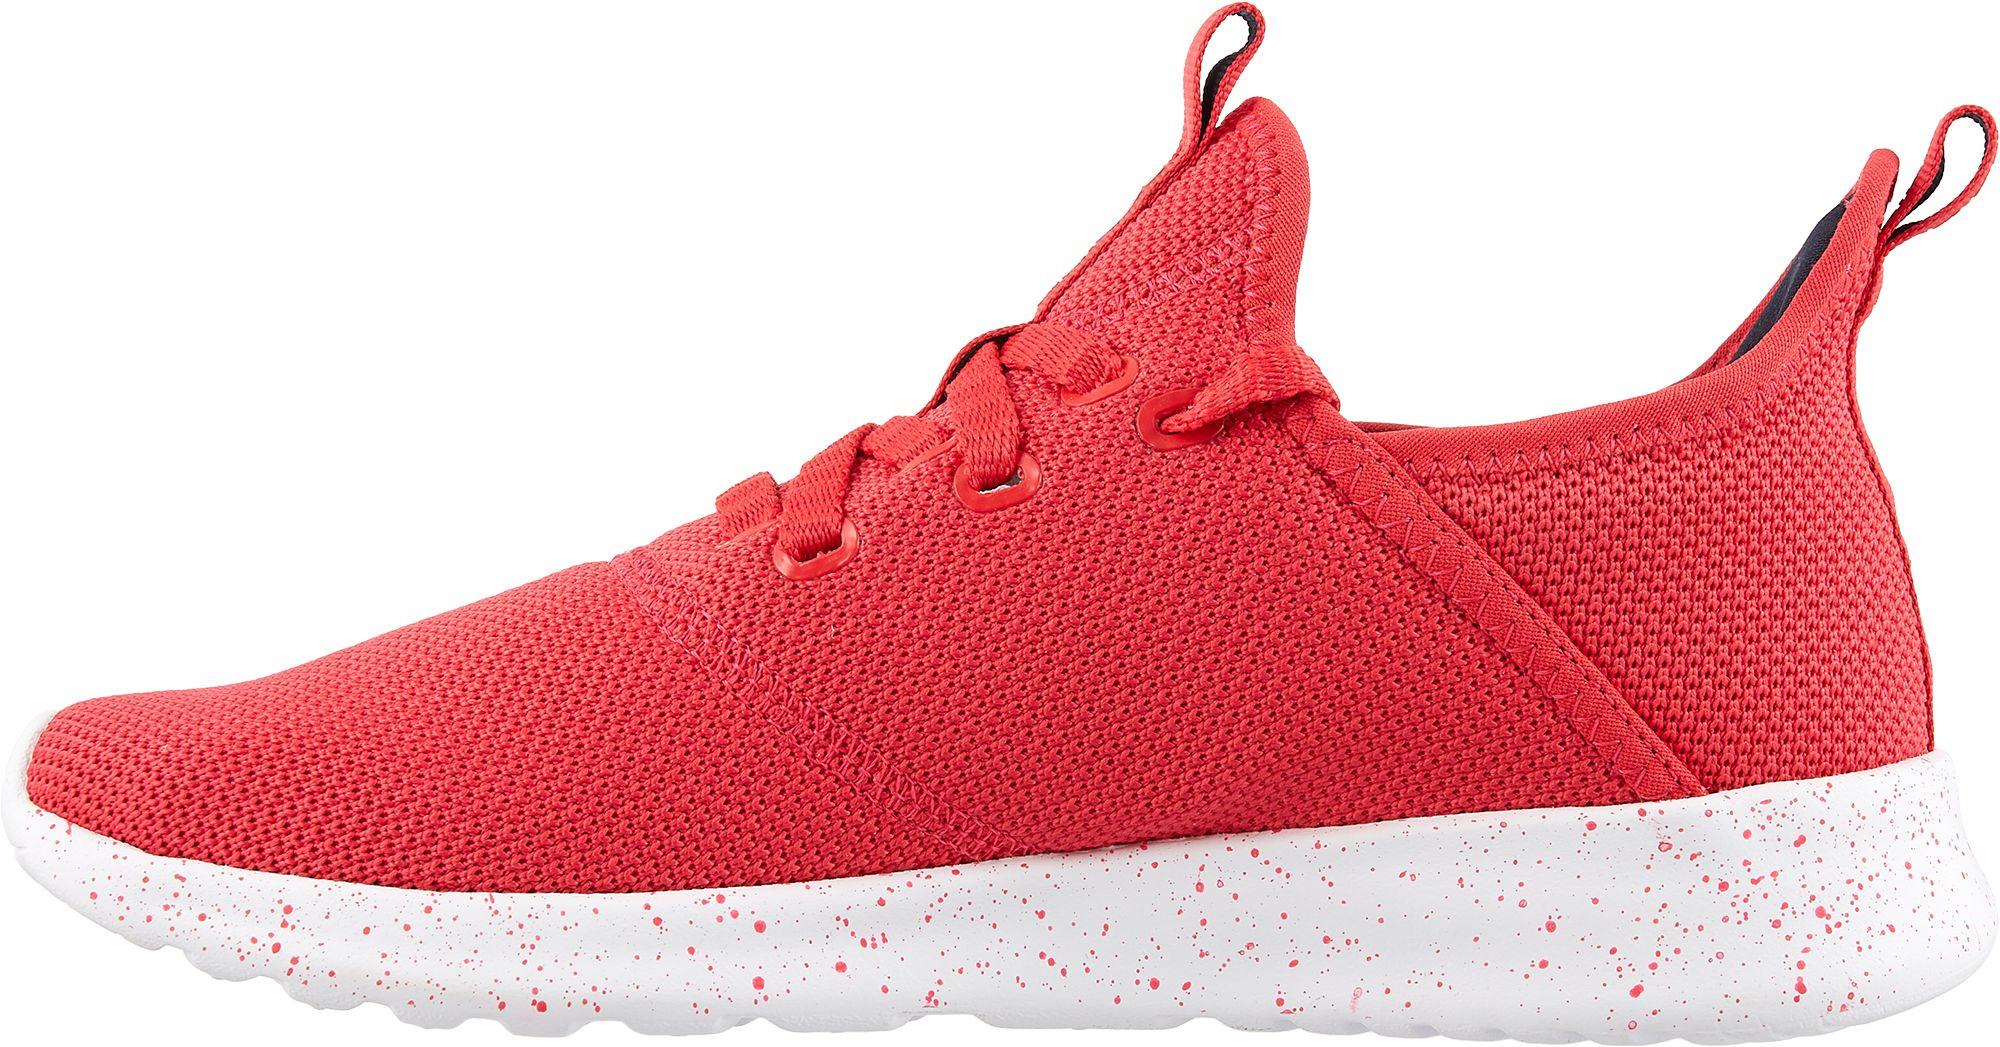 adidas Neoprene Cloudfoam Pure Shoes in Fuchsia (Red) | Lyst